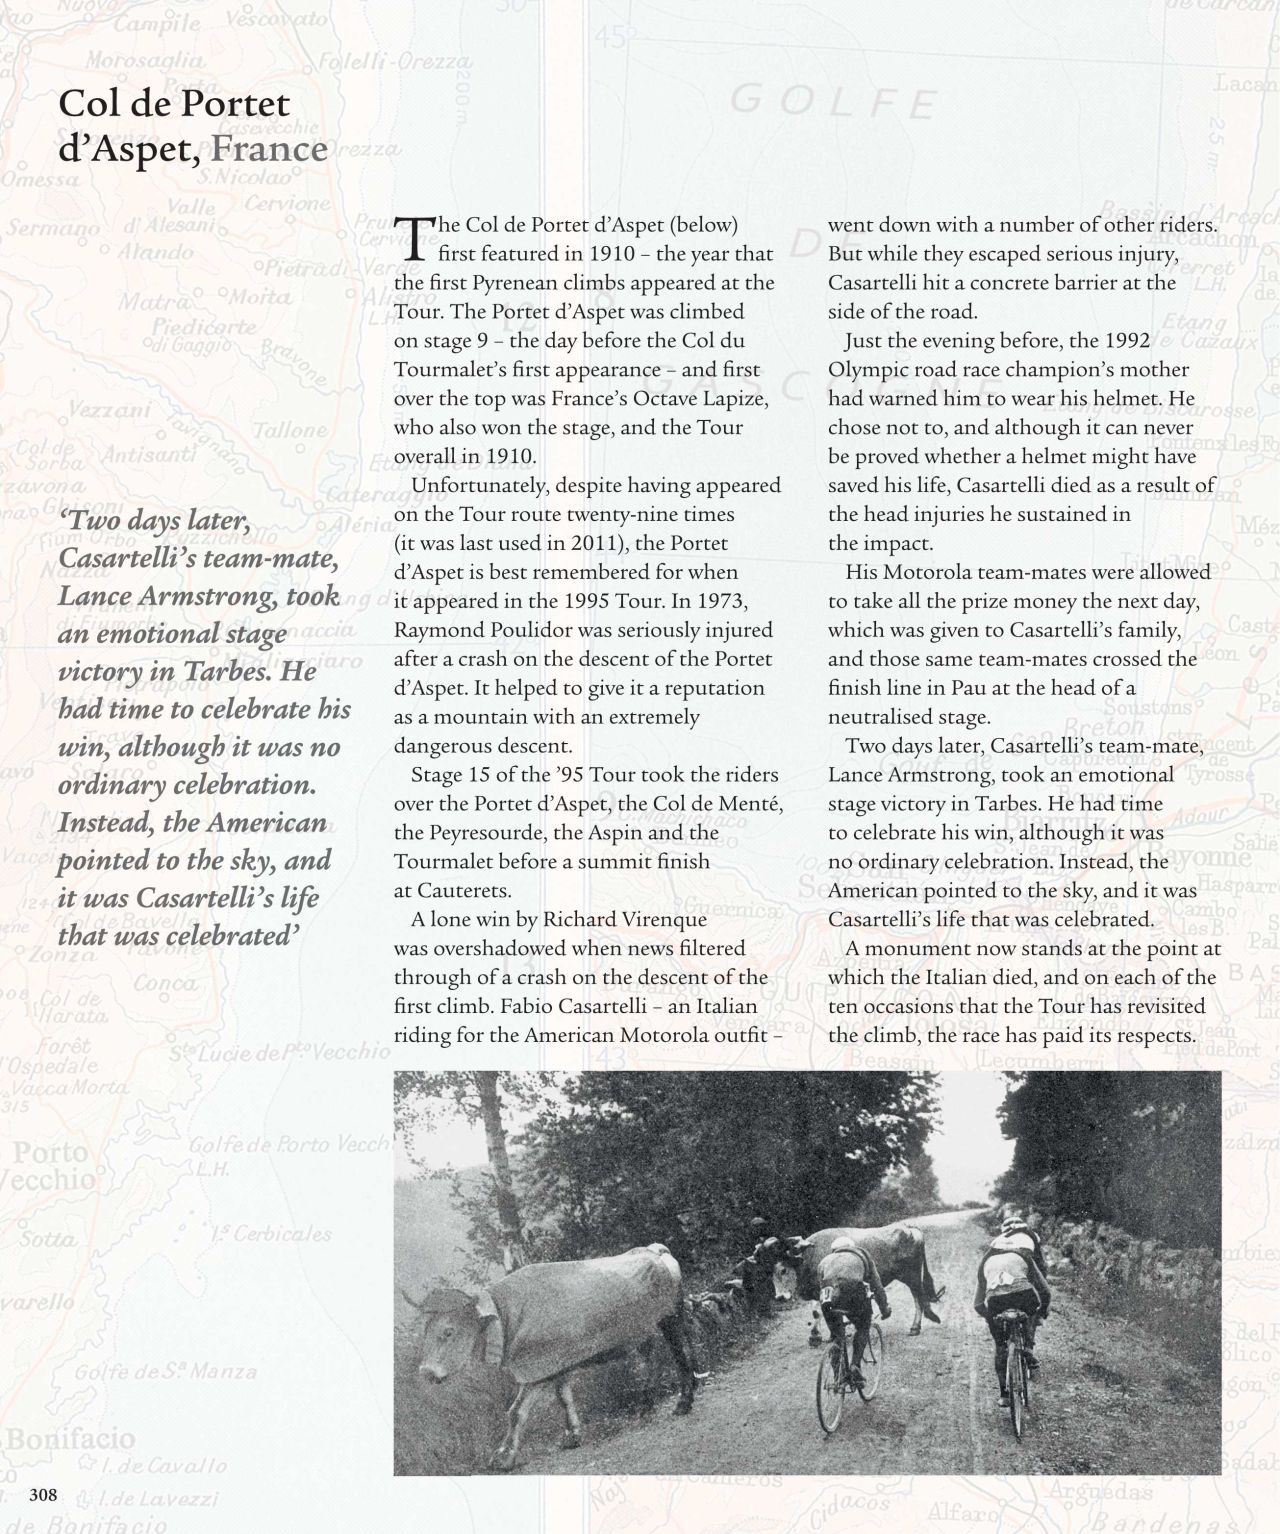 Riders tackle the first Pyrenean climb -- the Col de Portet d'Aspet -- in 1910. France's Octave Lapize was first over the top and won the race. But in 1995 the Col was the scene of tragedy as Italian Fabio Casartelli died after a crash on the descent.   <br /> 